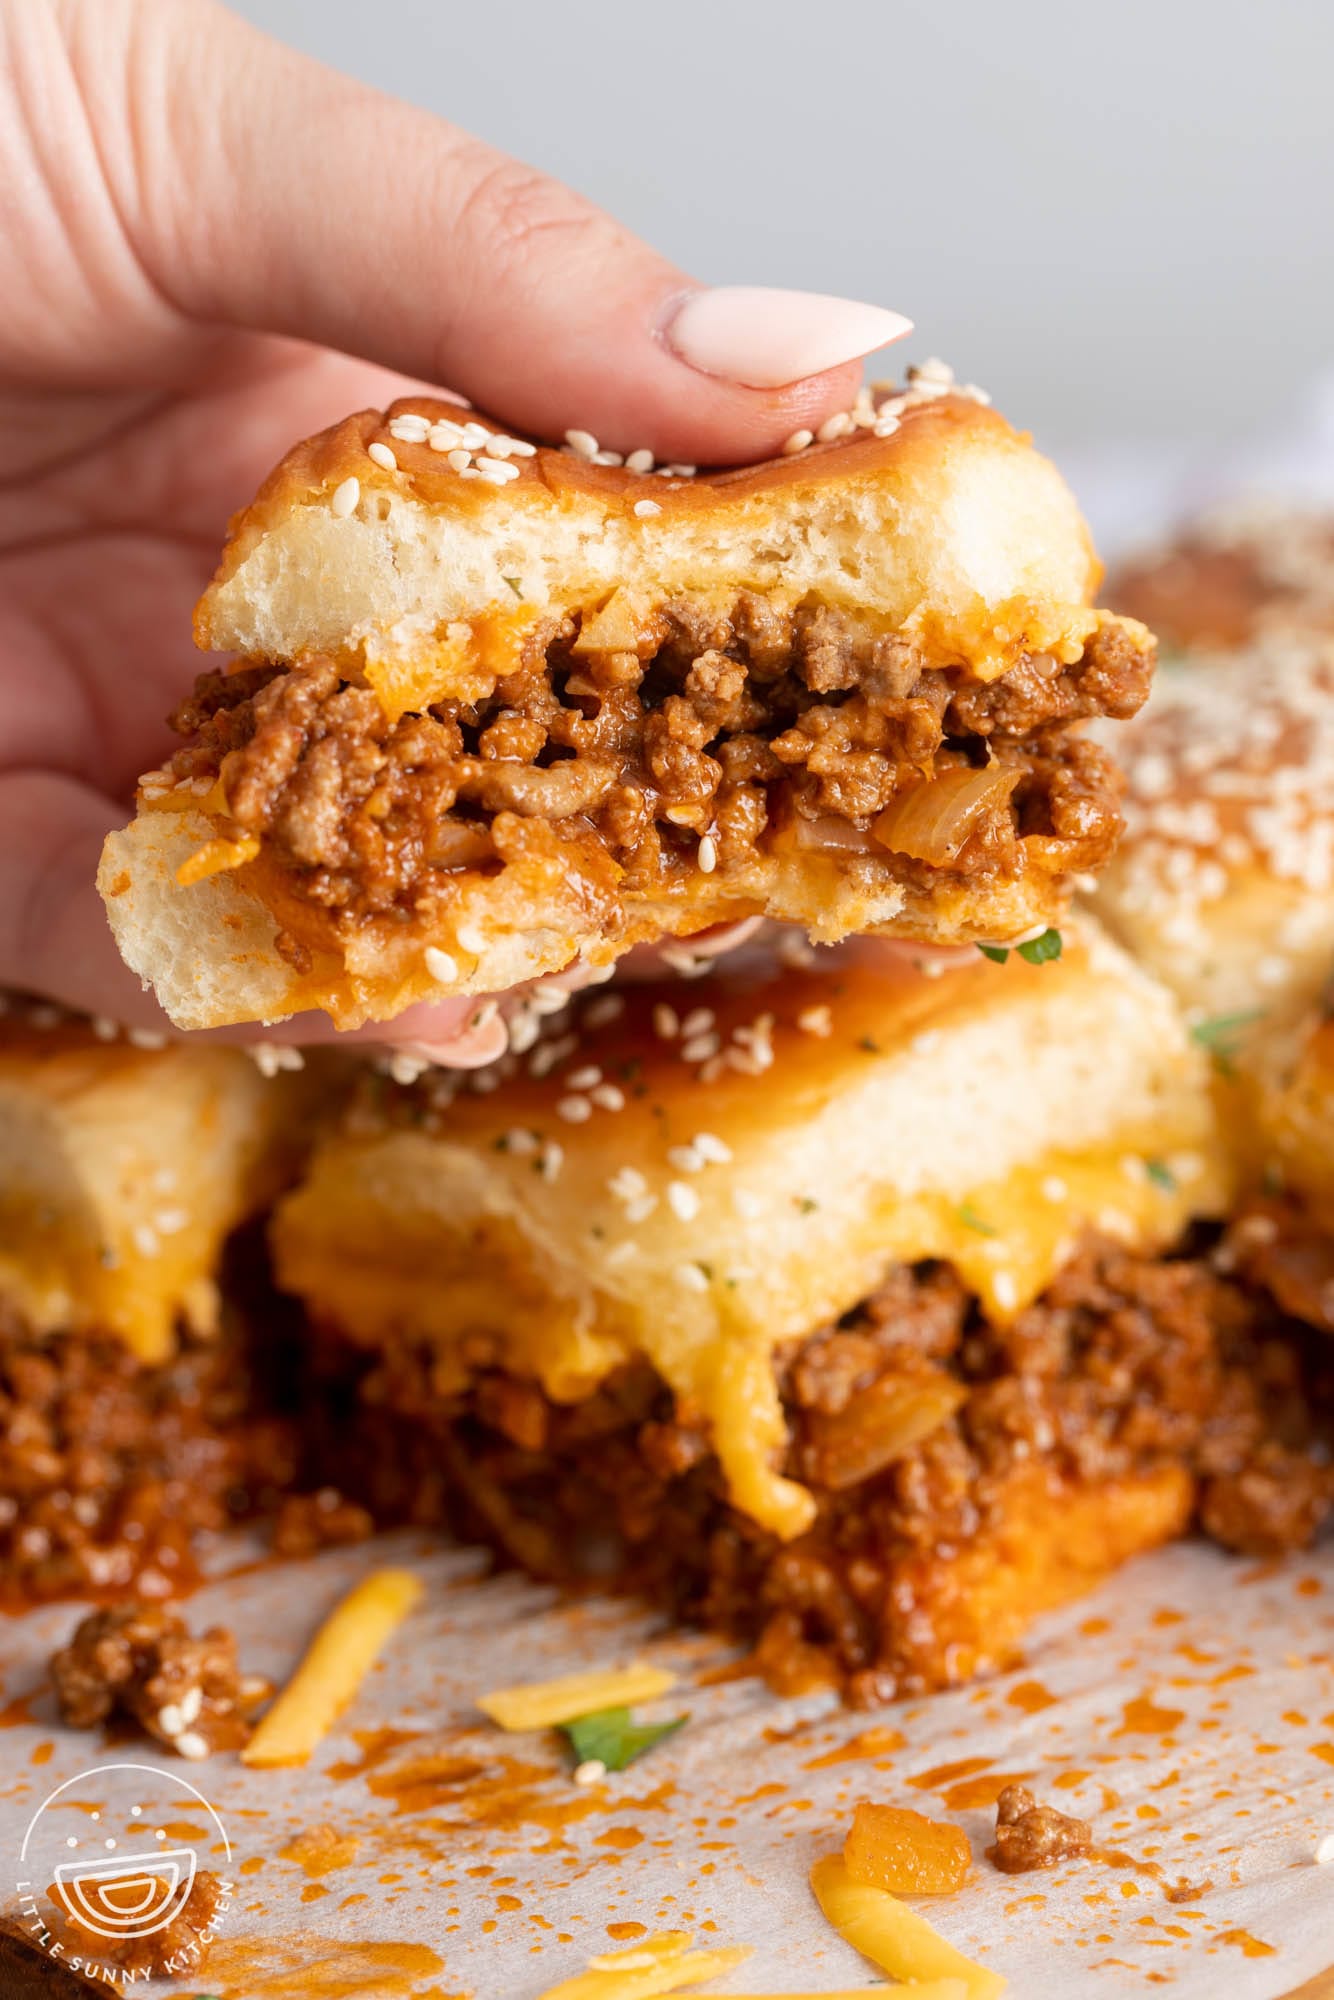 A hand picking up a freshly baked Sloppy Joe slider from a full tray.